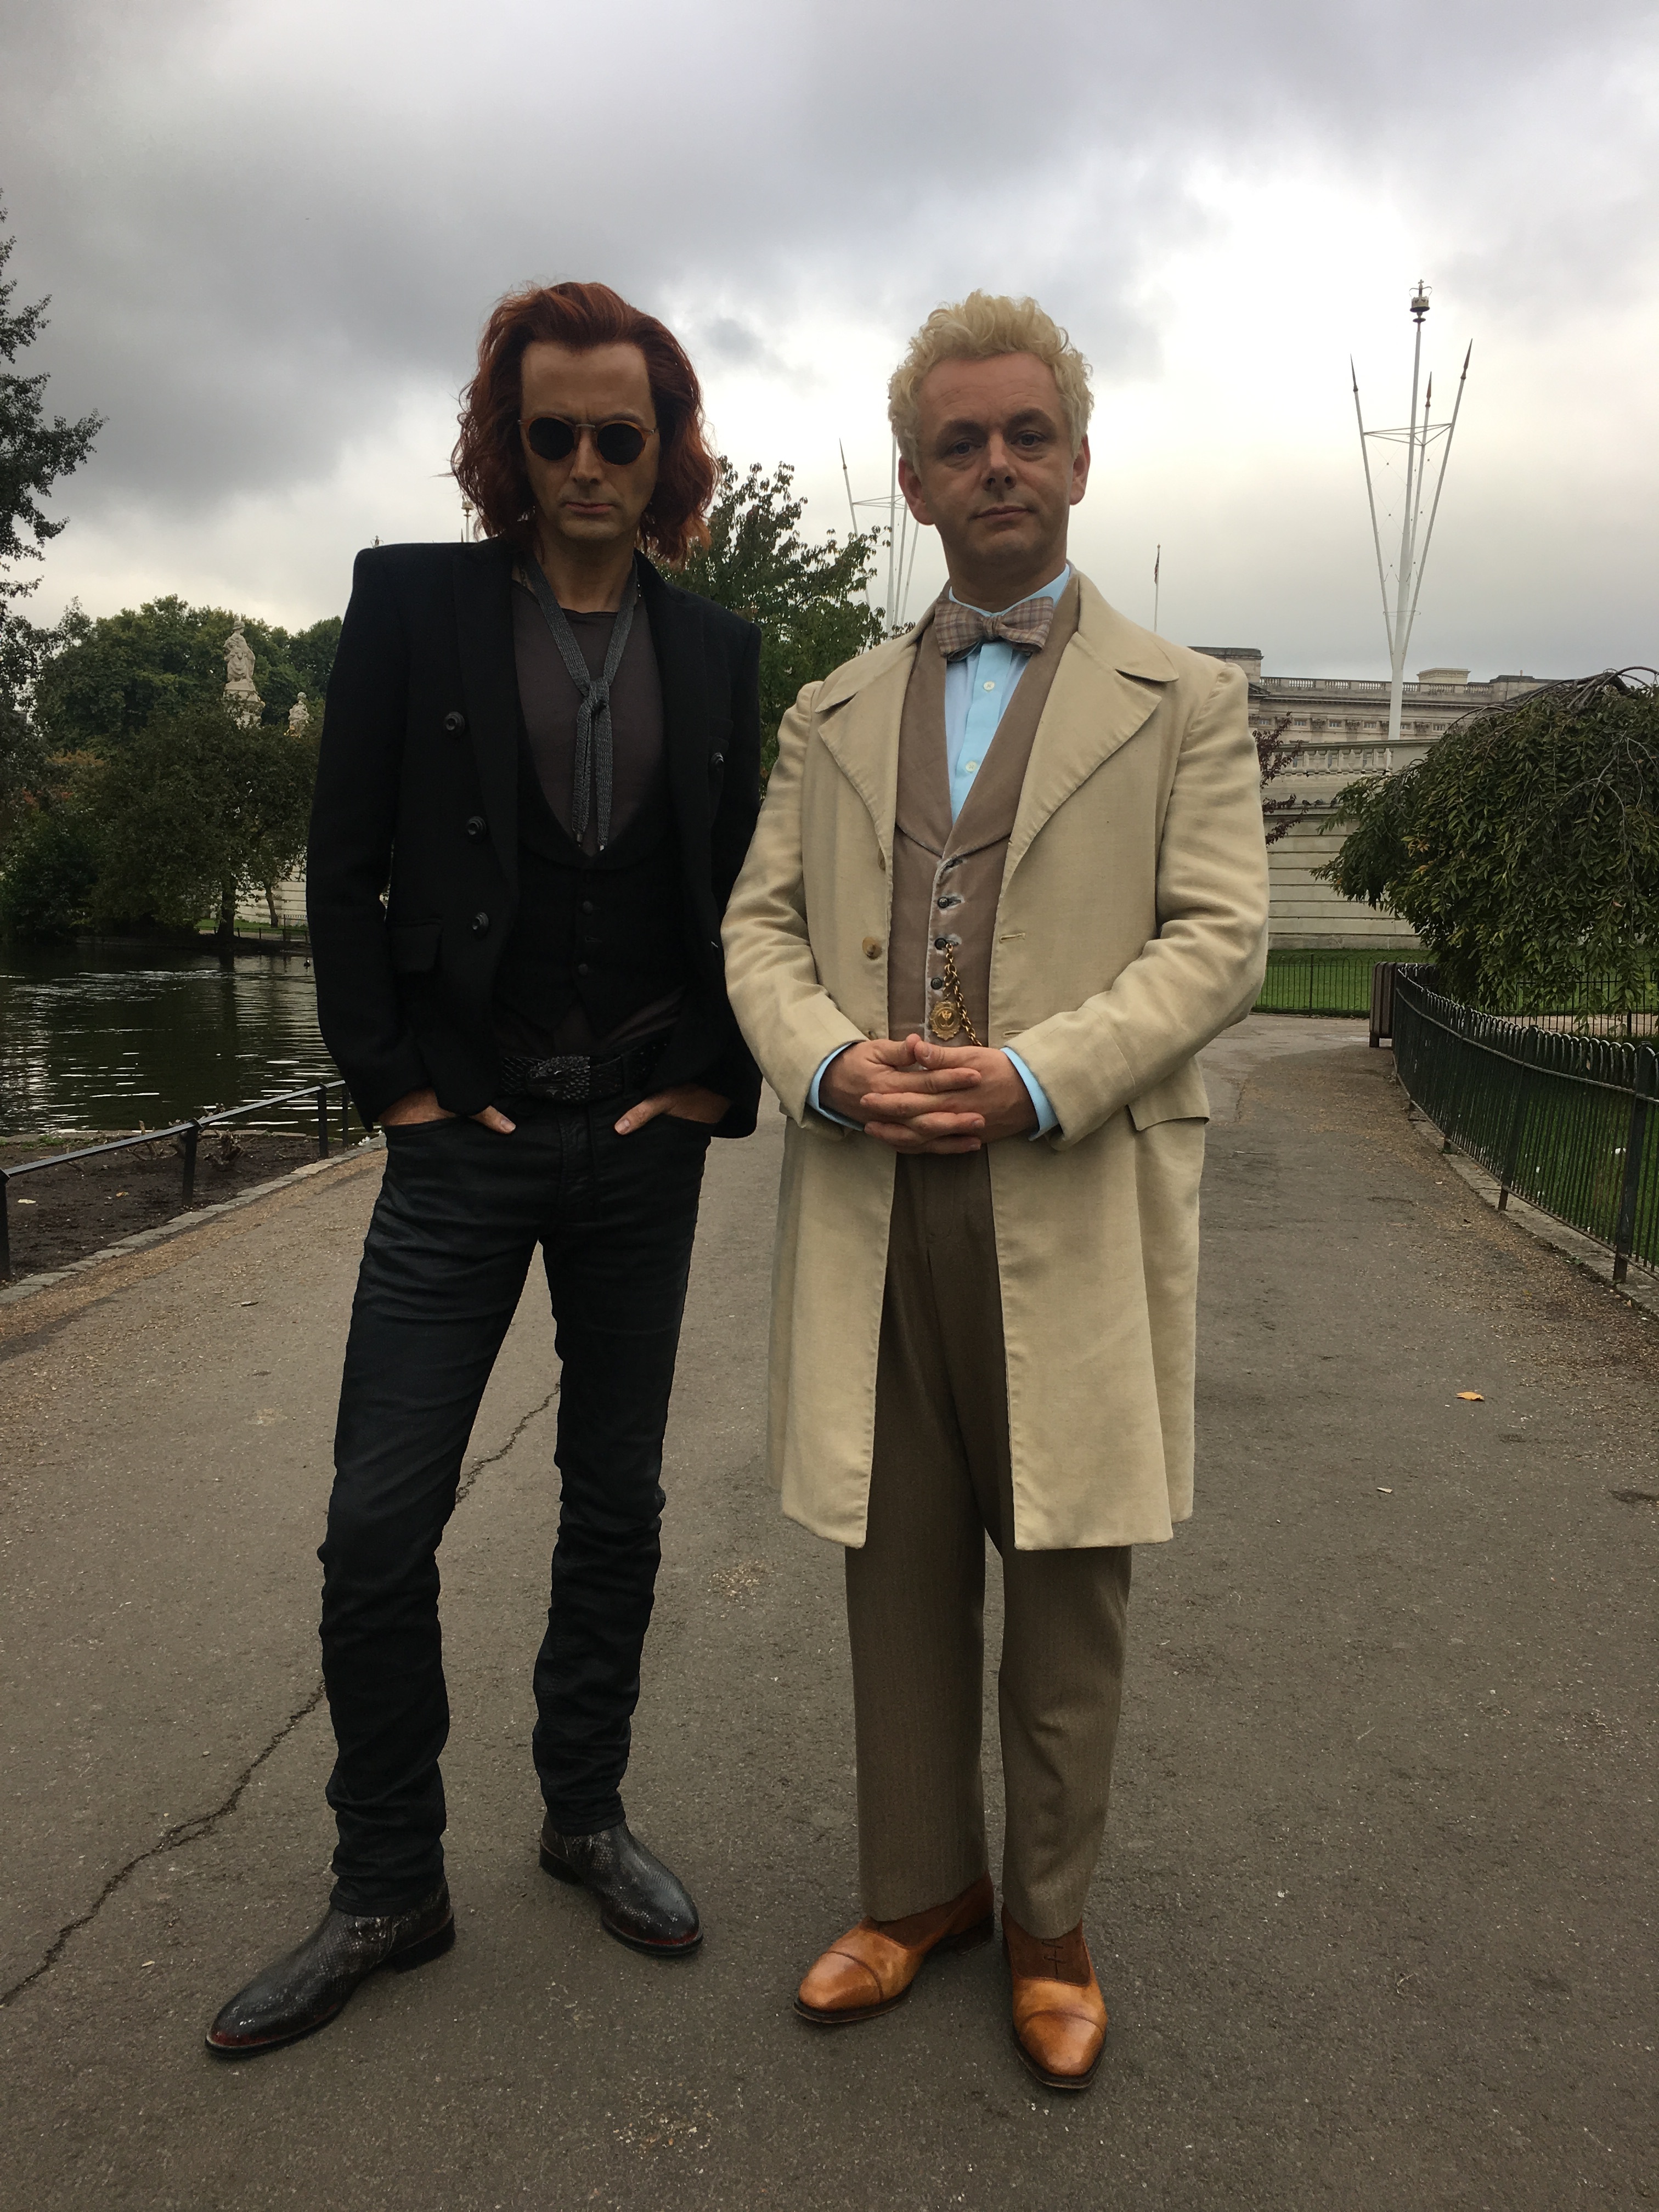 David Tennant and Michael Sheen on set for Good Omens.